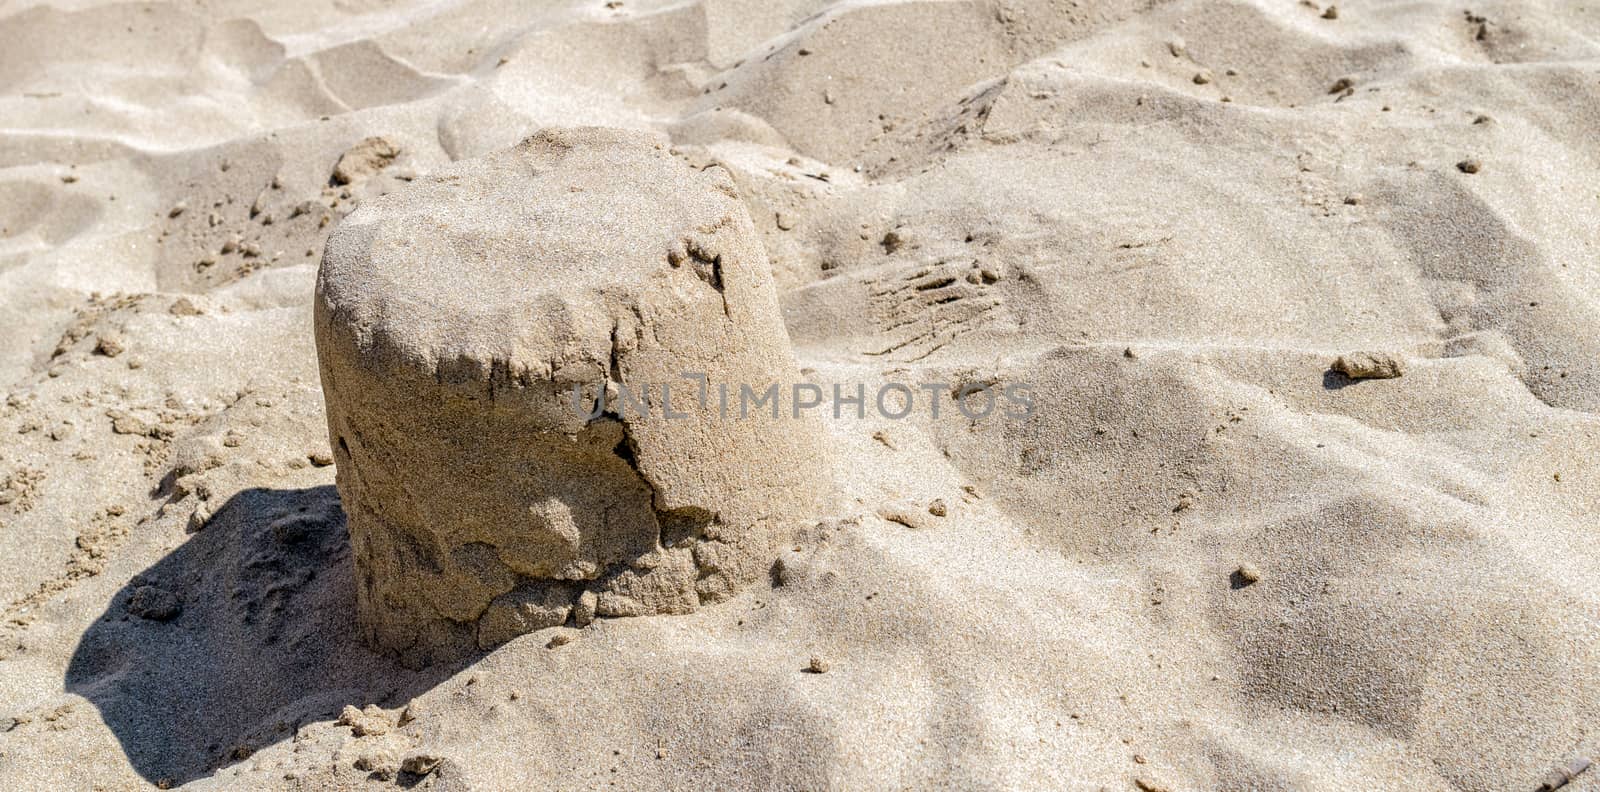 Small castle in the sand.